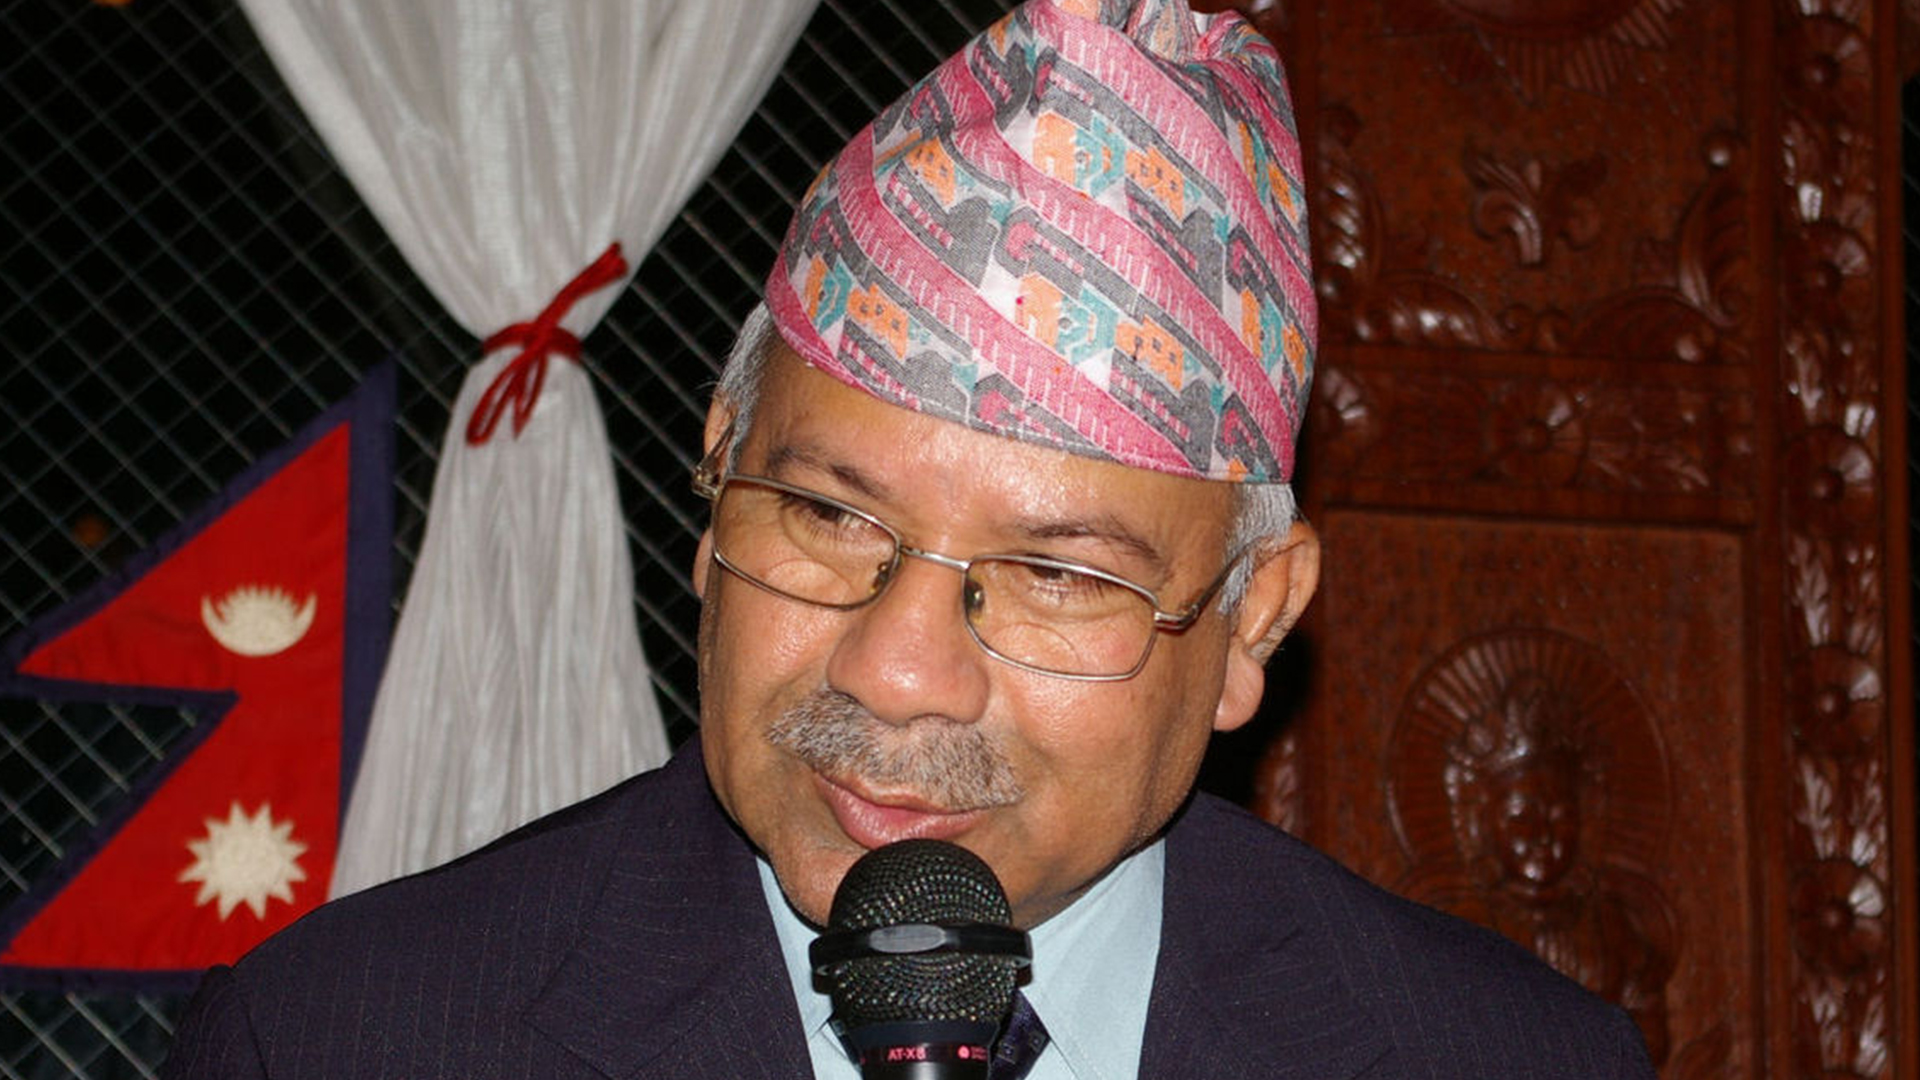 Madhav Kumar Nepal urges all to unite against the dissolvement of the parliament